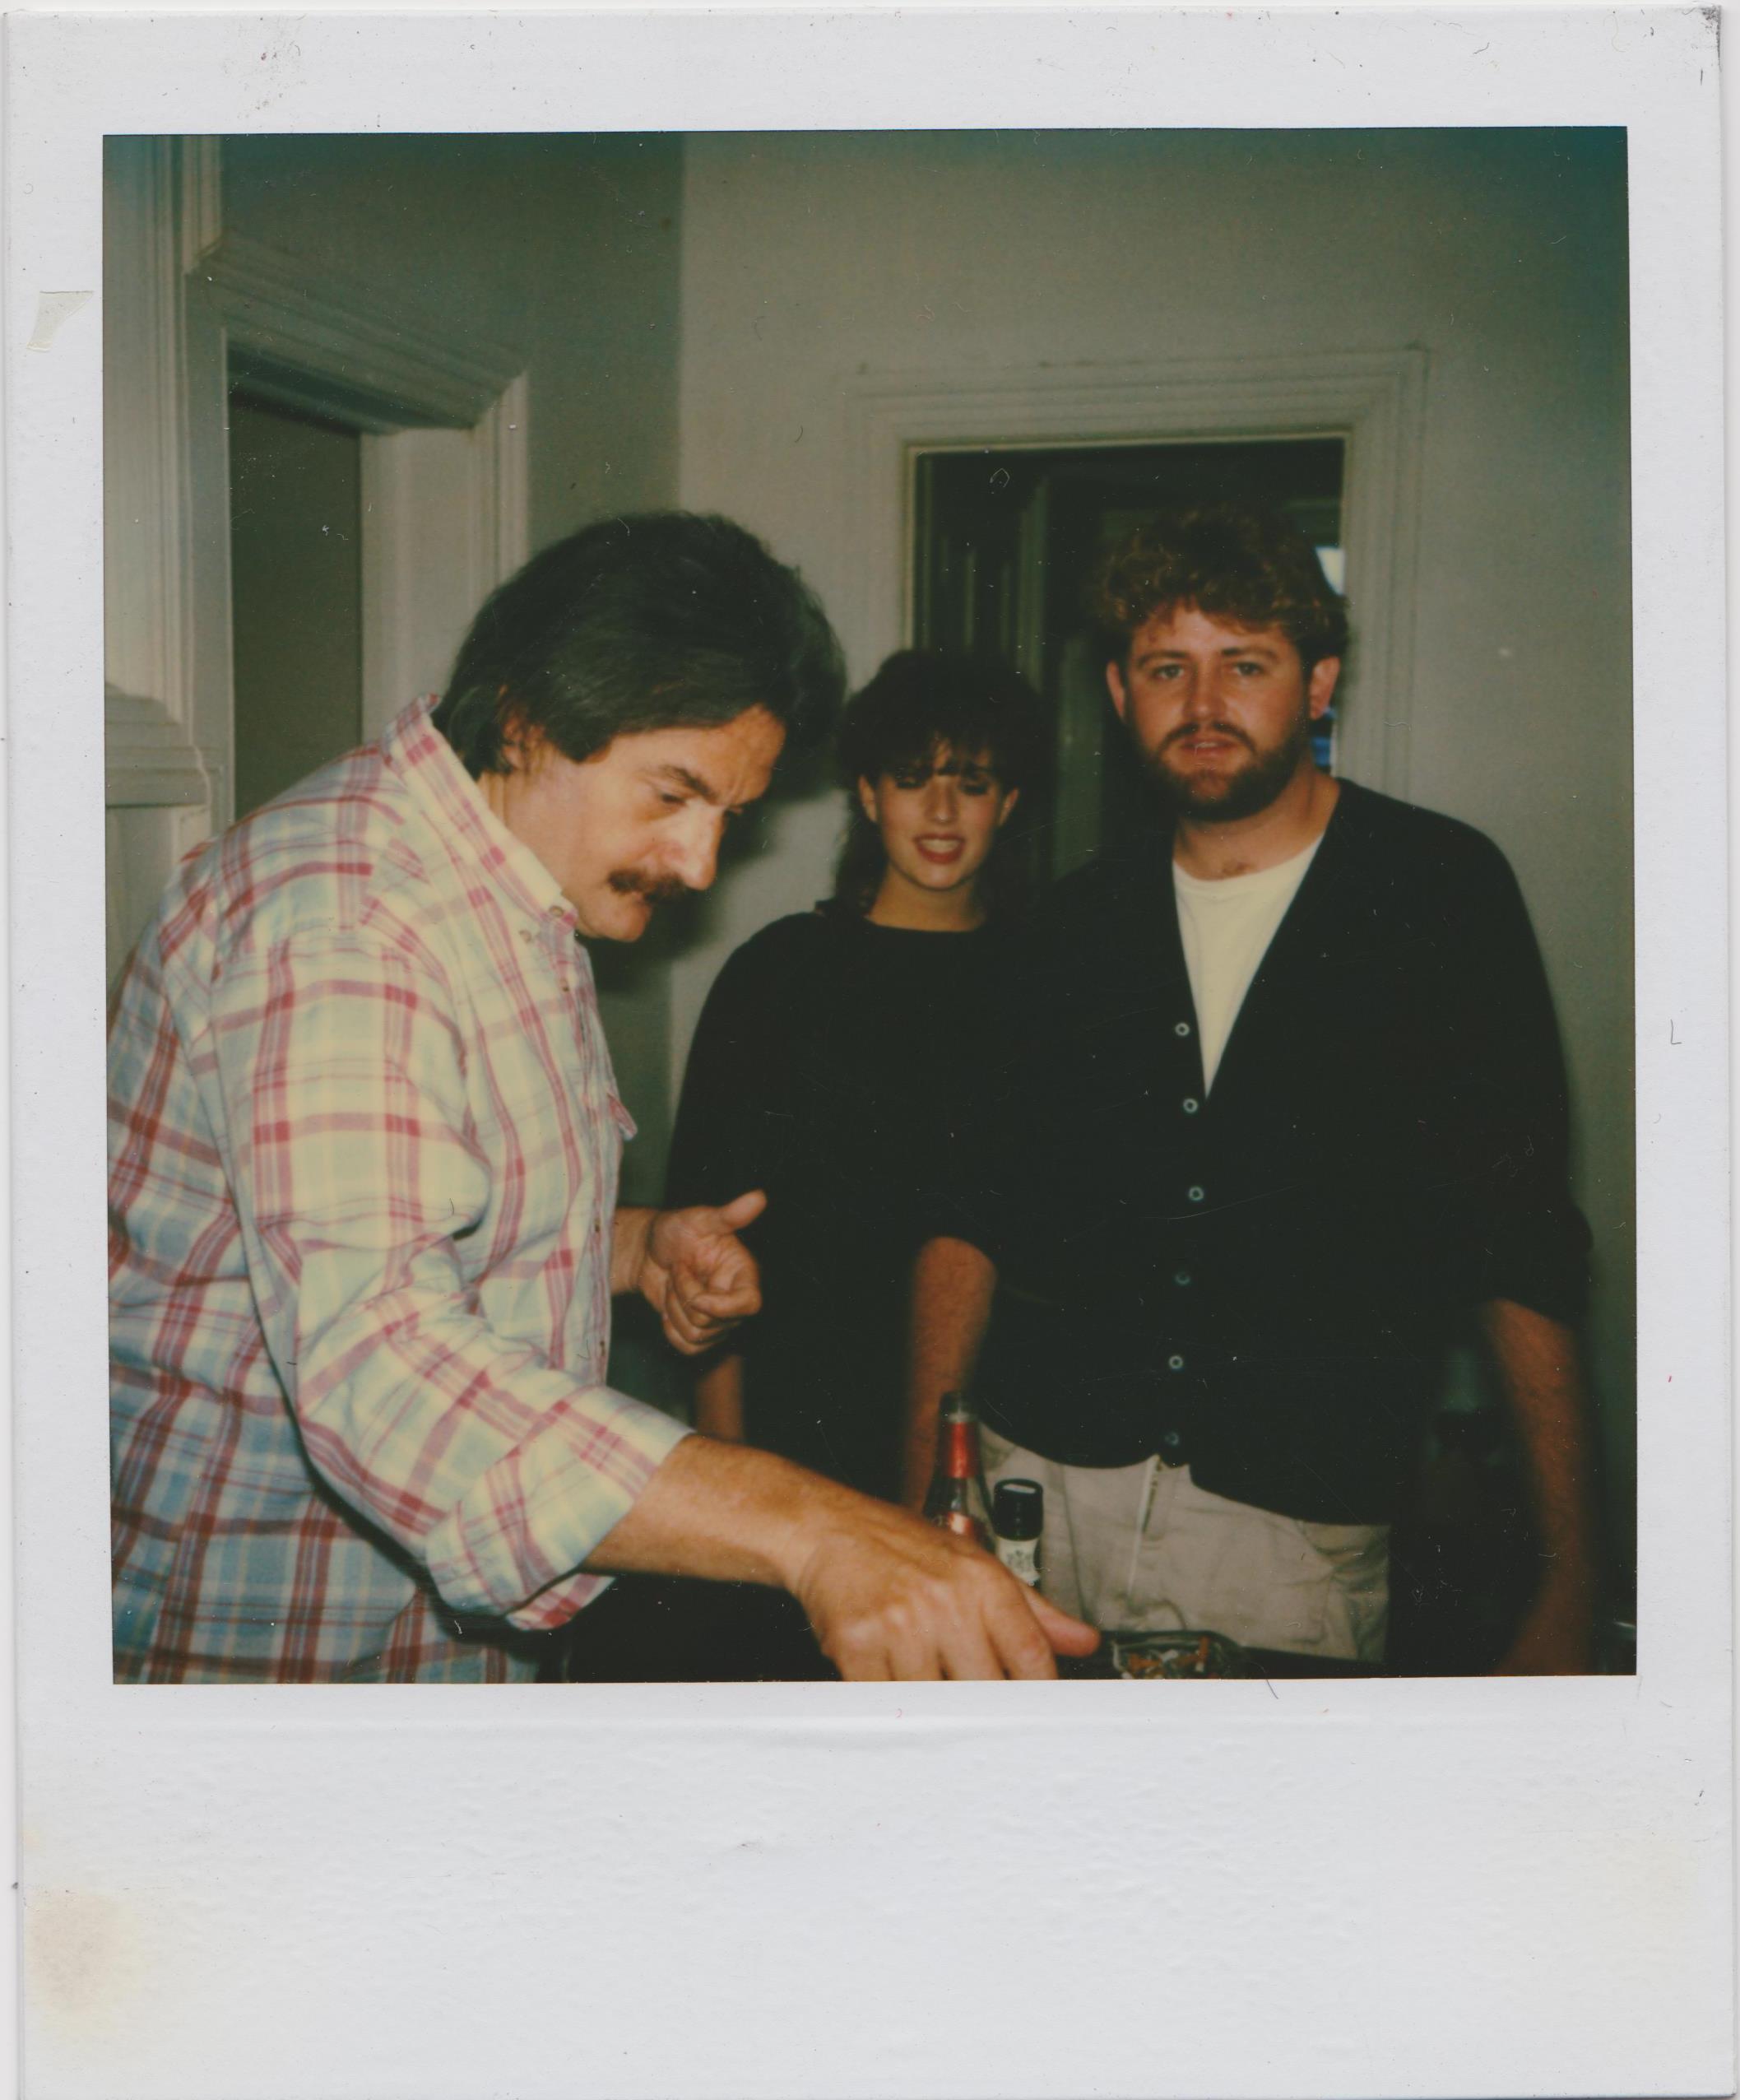 Funnel Ondine and Zoe Yanofsky and John Frizzell c 1983 at McLean party